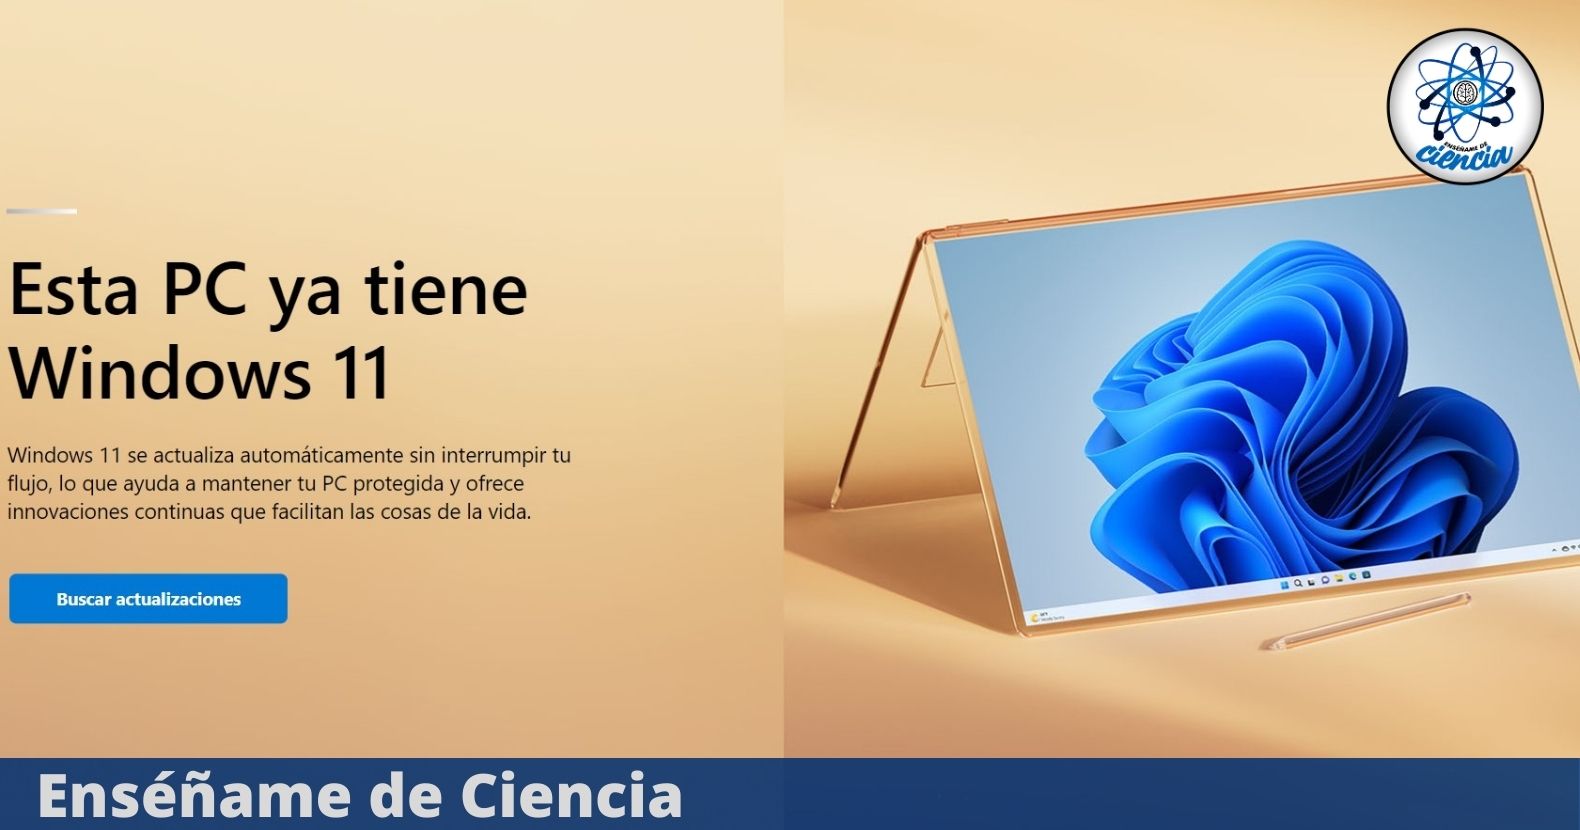 Get Windows 11 for free without a license and enjoy its benefits – Enseñame de Ciencia